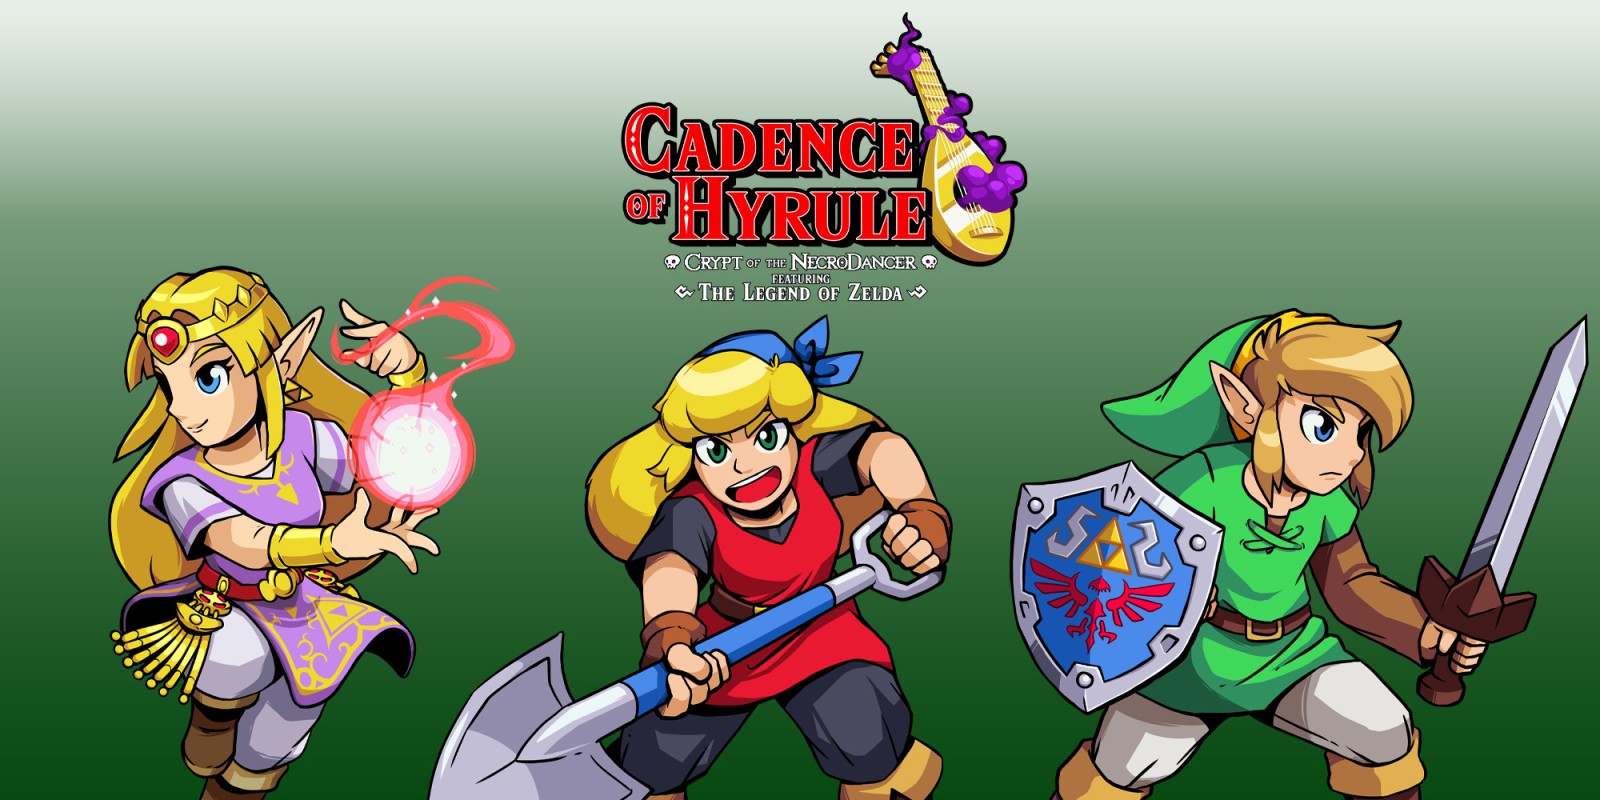 Cadence of Hyrule, the Zelda rhythm game, is out this week